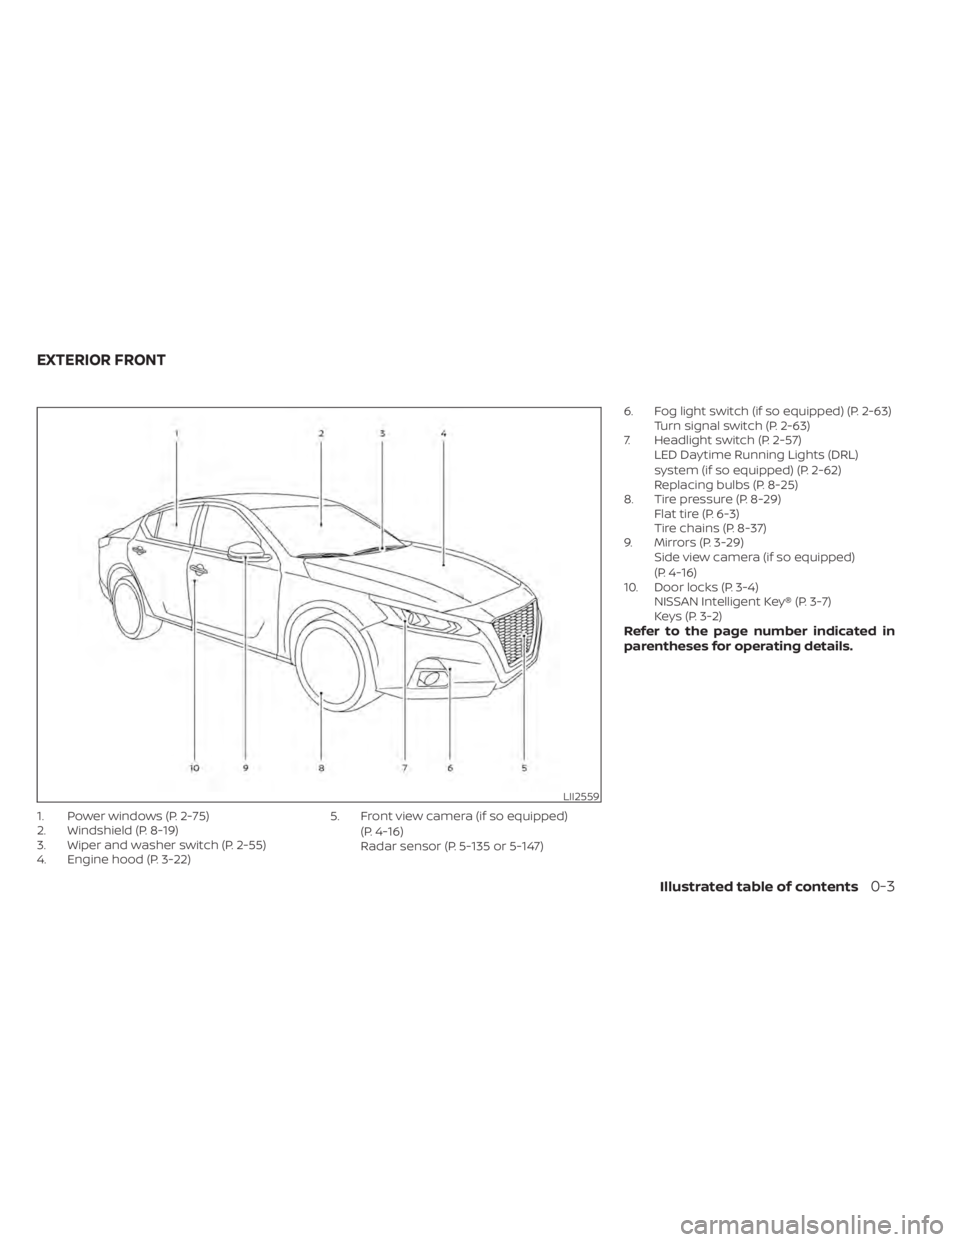 NISSAN ALTIMA 2023 User Guide 1. Power windows (P. 2-75)
2. Windshield (P. 8-19)
3. Wiper and washer switch (P. 2-55)
4. Engine hood (P. 3-22)5. Front view camera (if so equipped)
(P. 4-16)
Radar sensor (P. 5-135 or 5-147) 6. Fog 